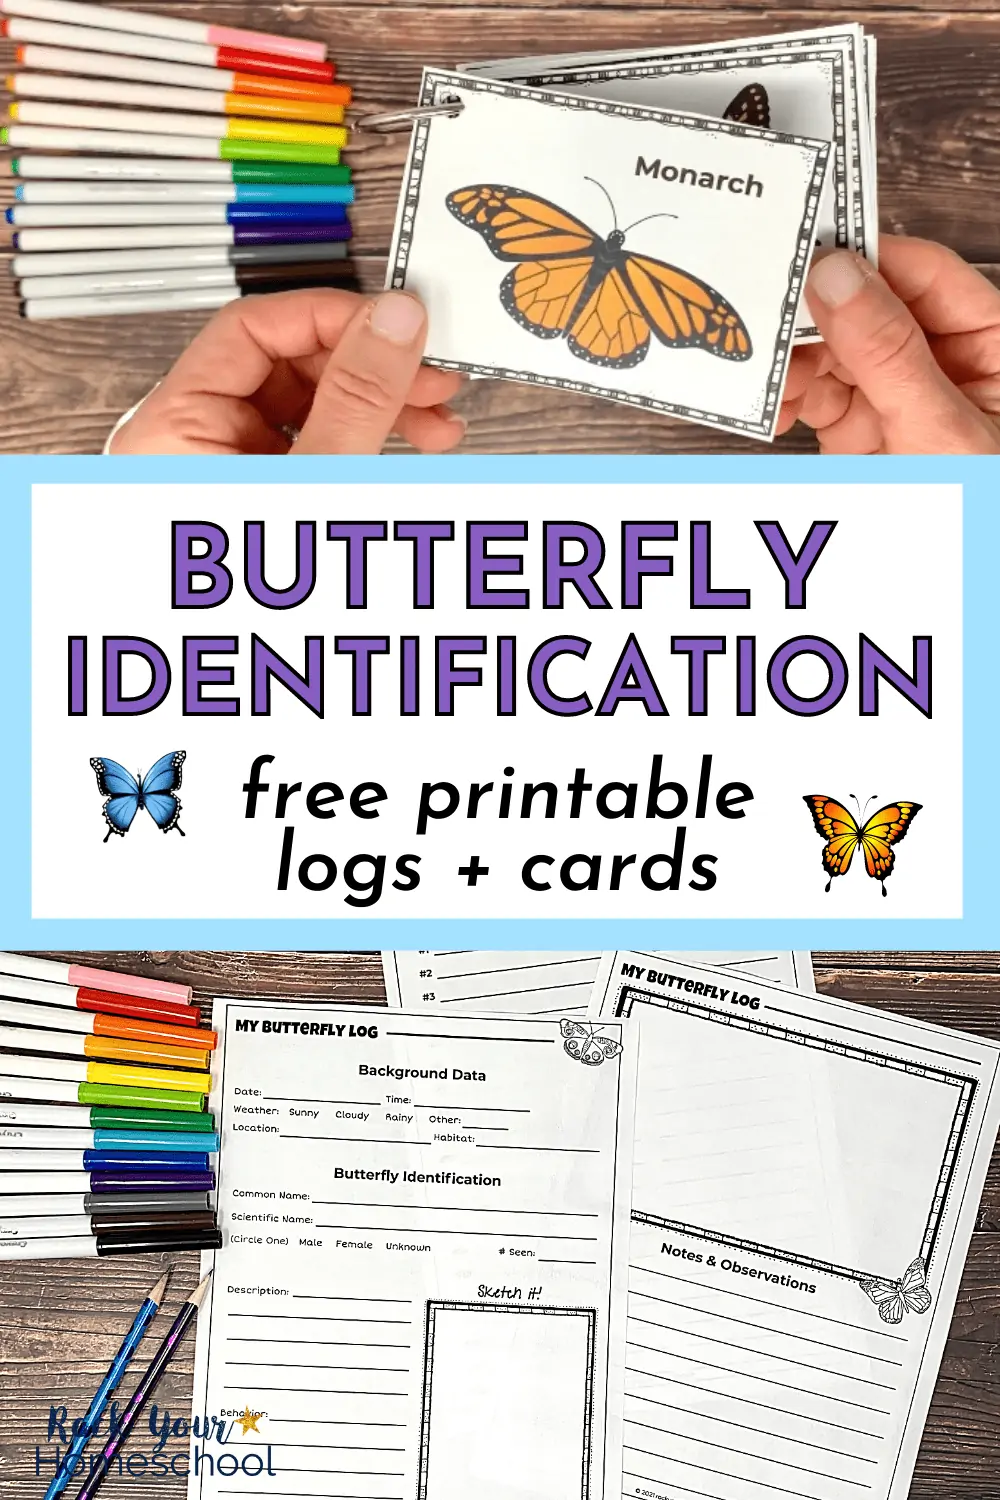 14 Free Butterfly Printables for Identification and More Fun Activities